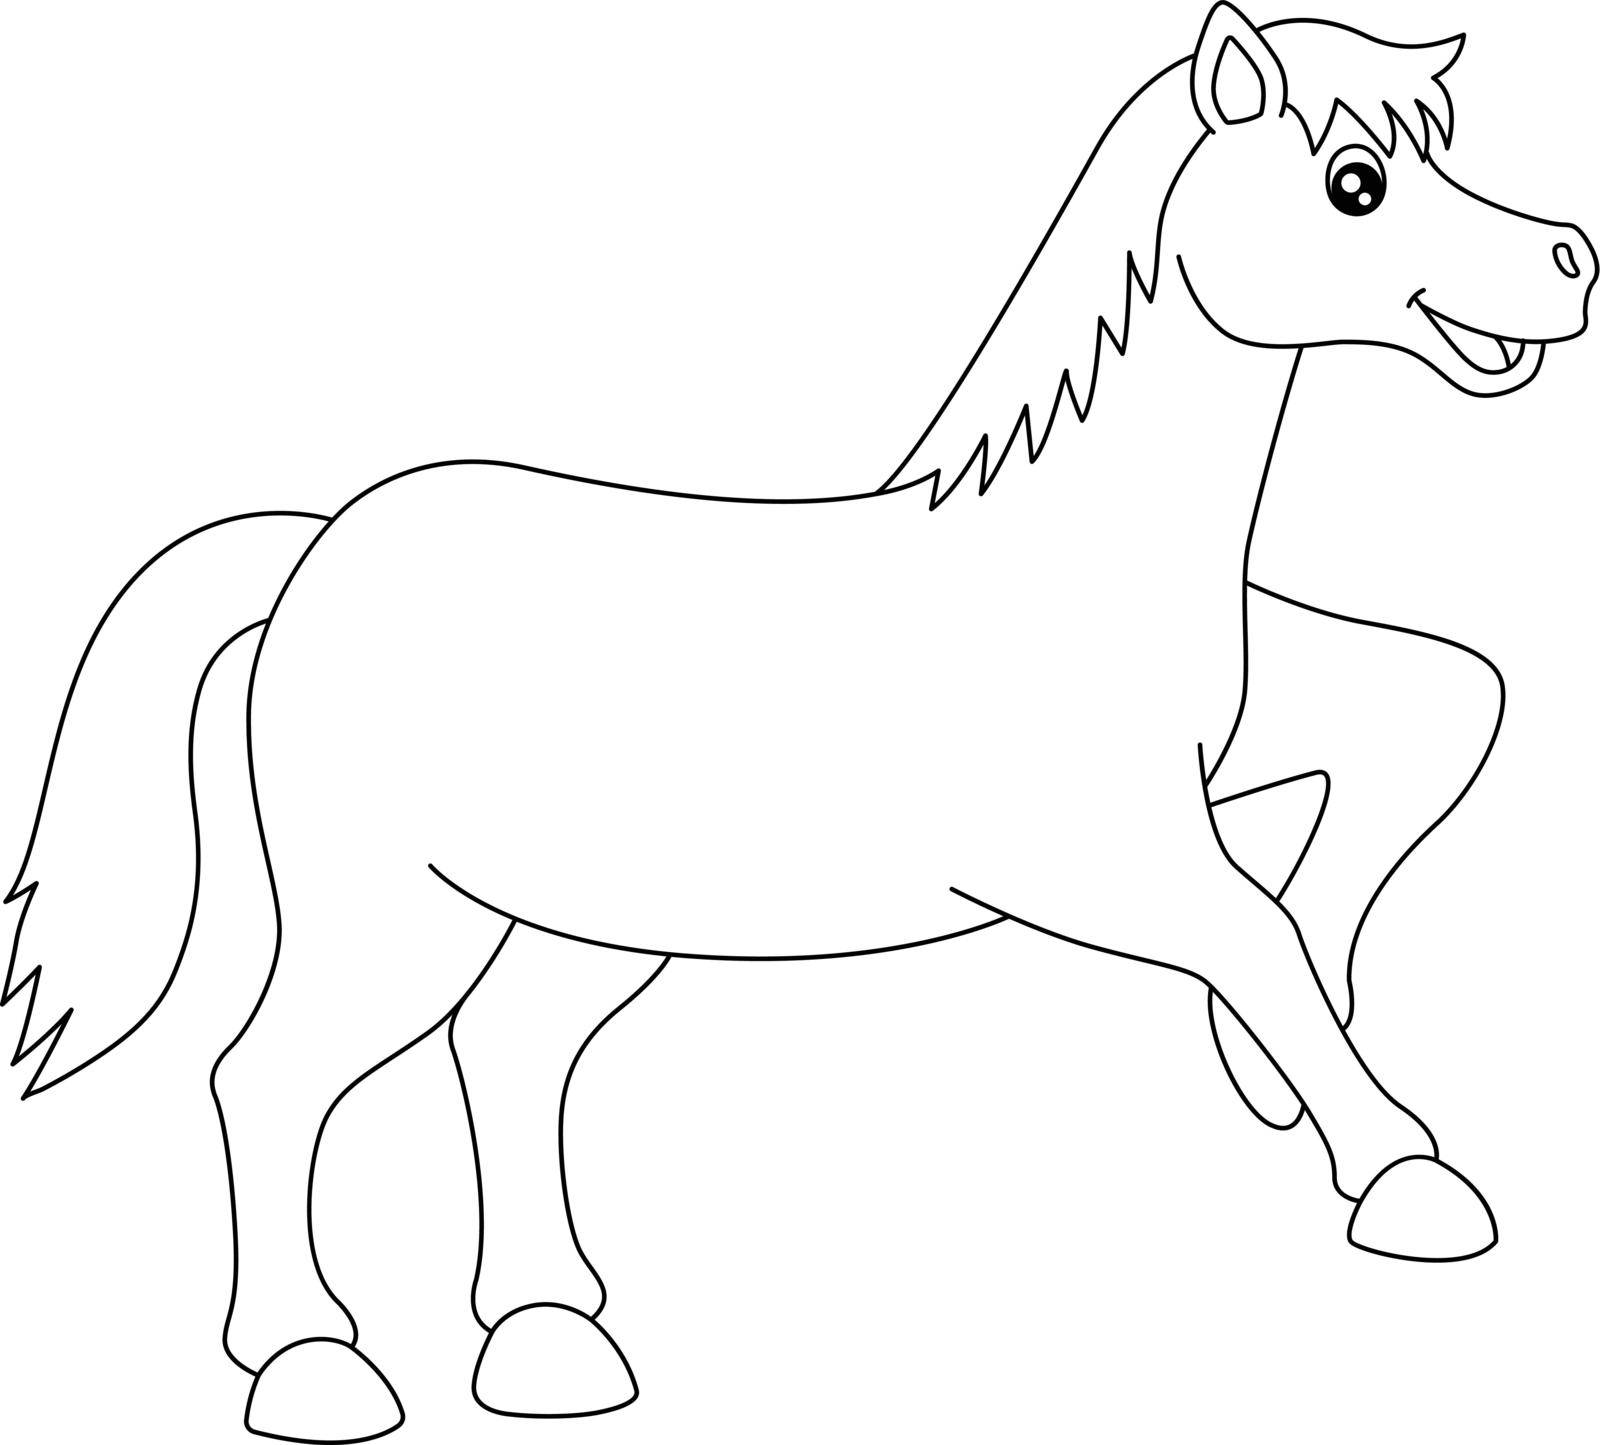 A cute and funny coloring page of a horse. Provides hours of coloring fun for children. To color, this page is very easy. Suitable for little kids and toddlers